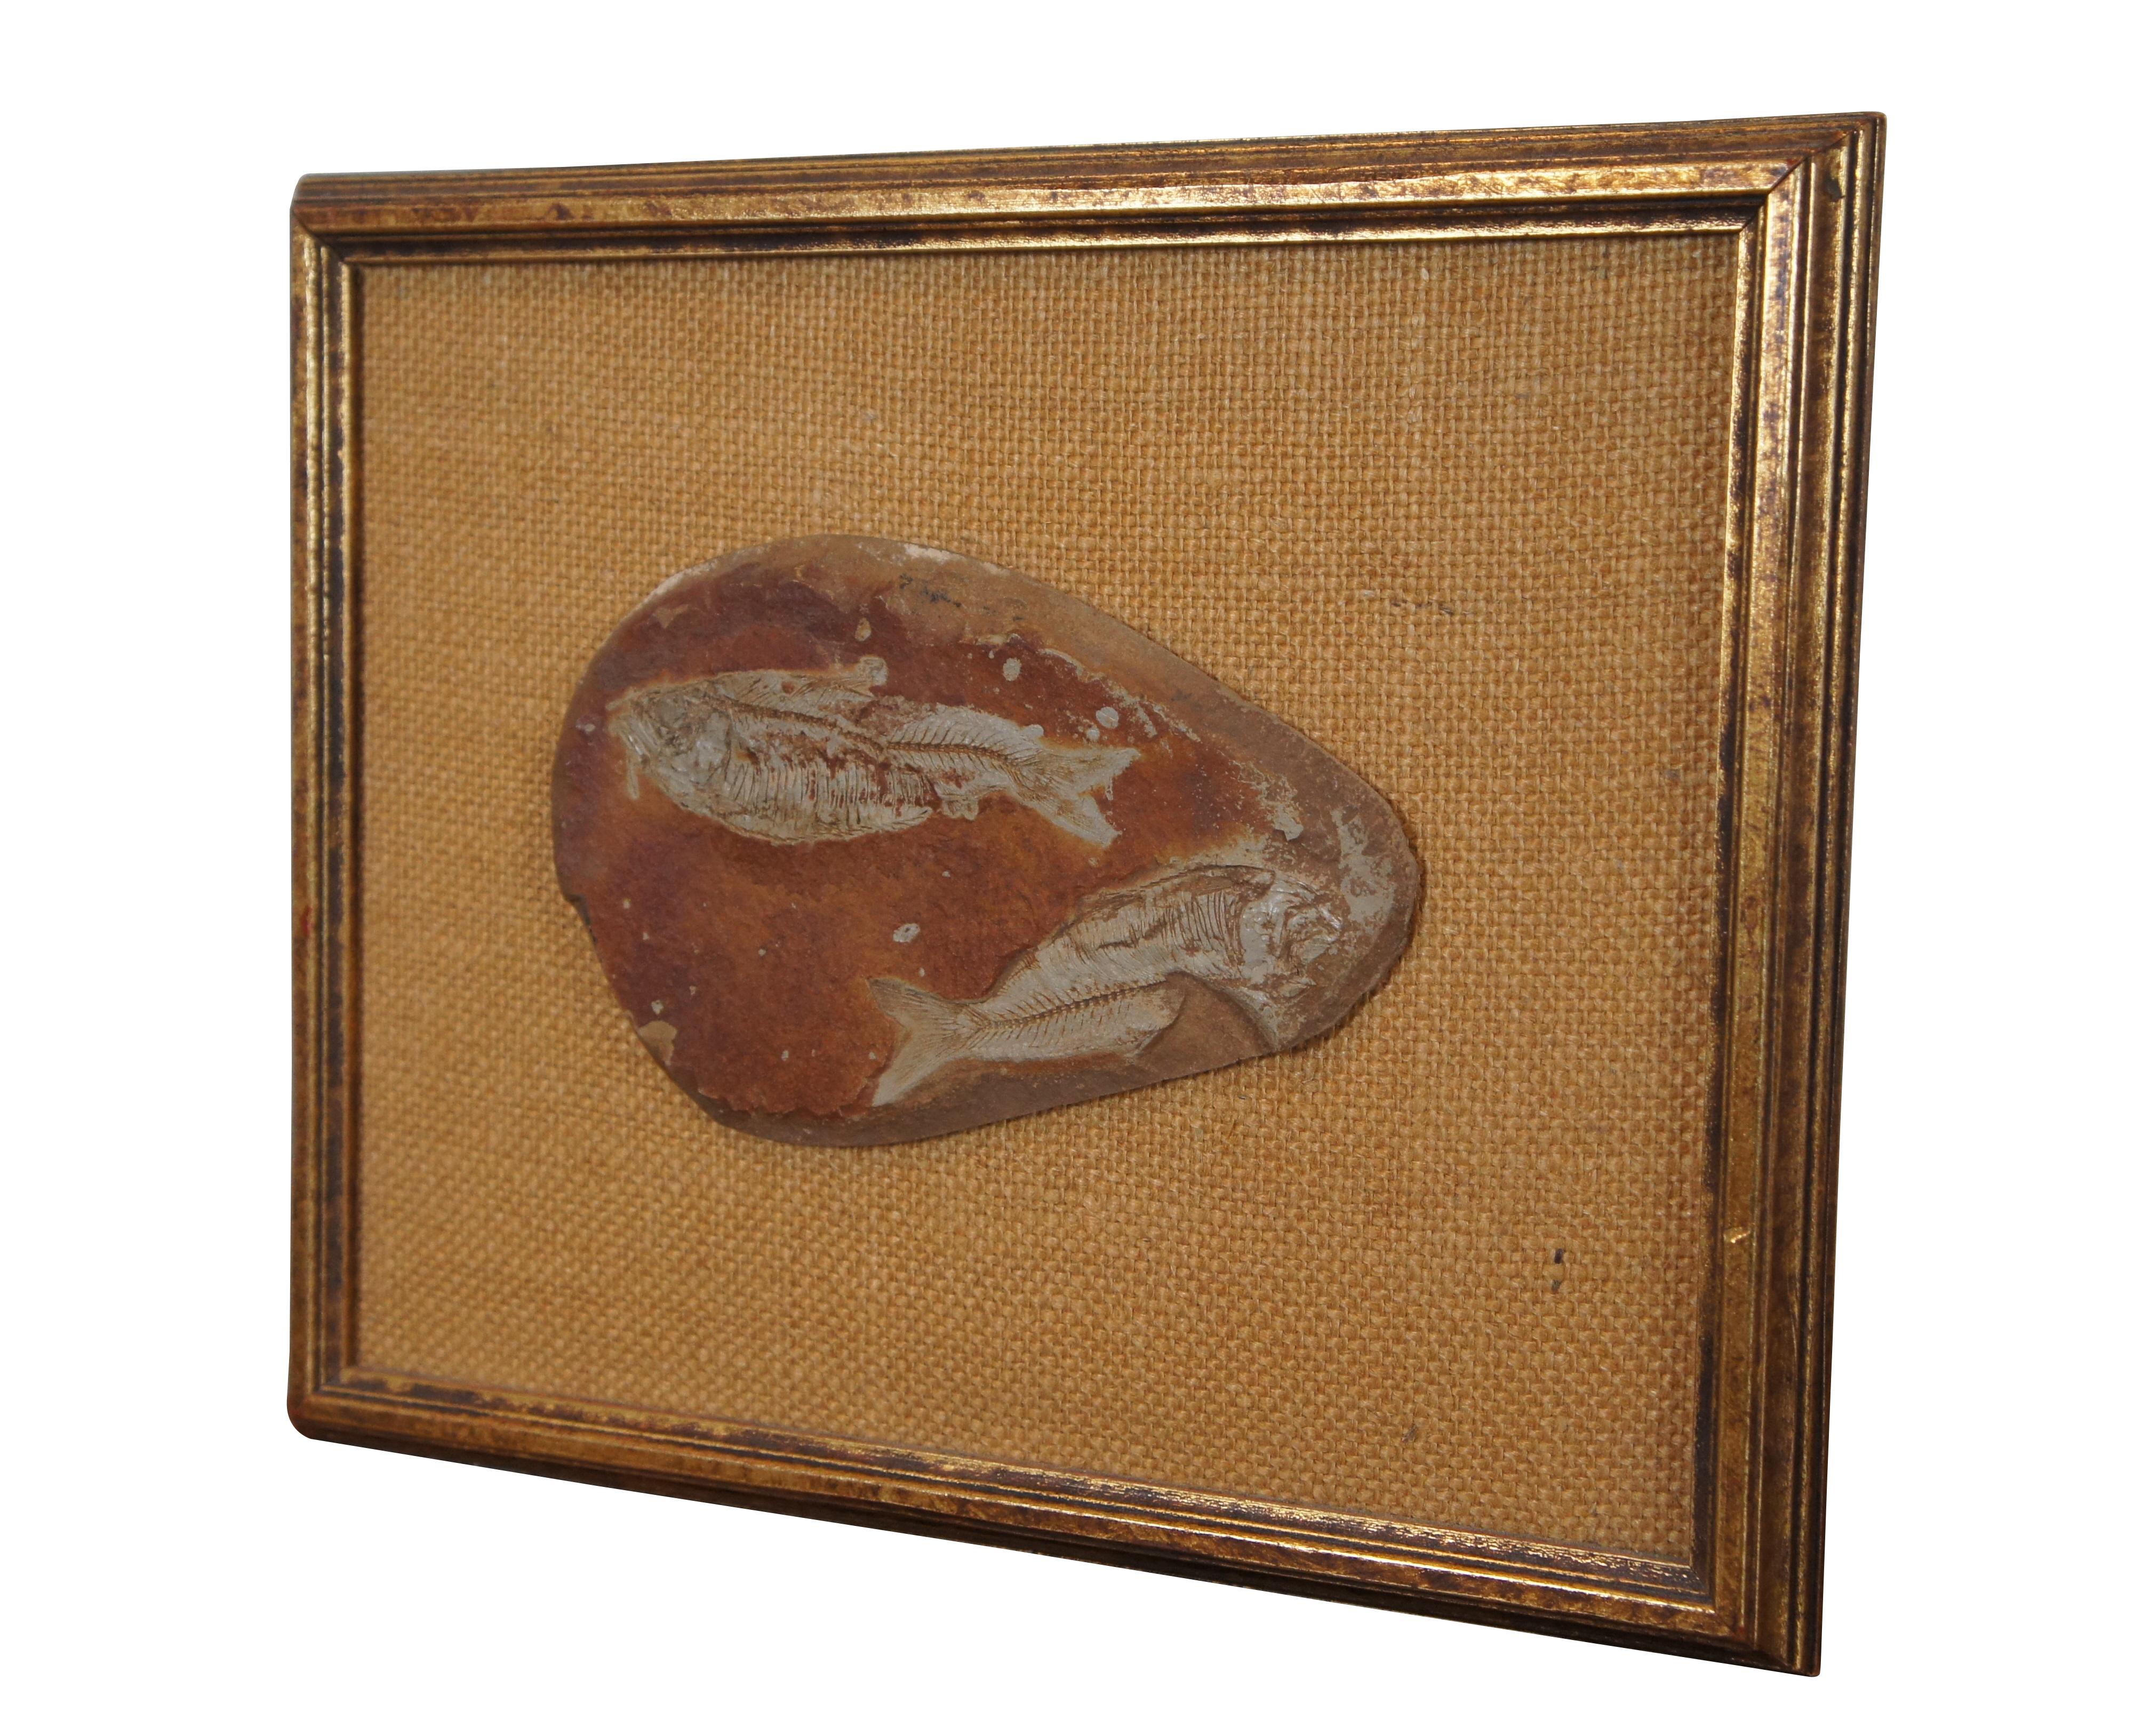 Antique fossilized Diplomystus fishes in slate rock, mounted to burlap, framed in gold circa 1968.

Diplomystus is an extinct genus of freshwater fishy fish clupeomorph fish distantly related to modern-day extant herrings, alewives, and sardines.